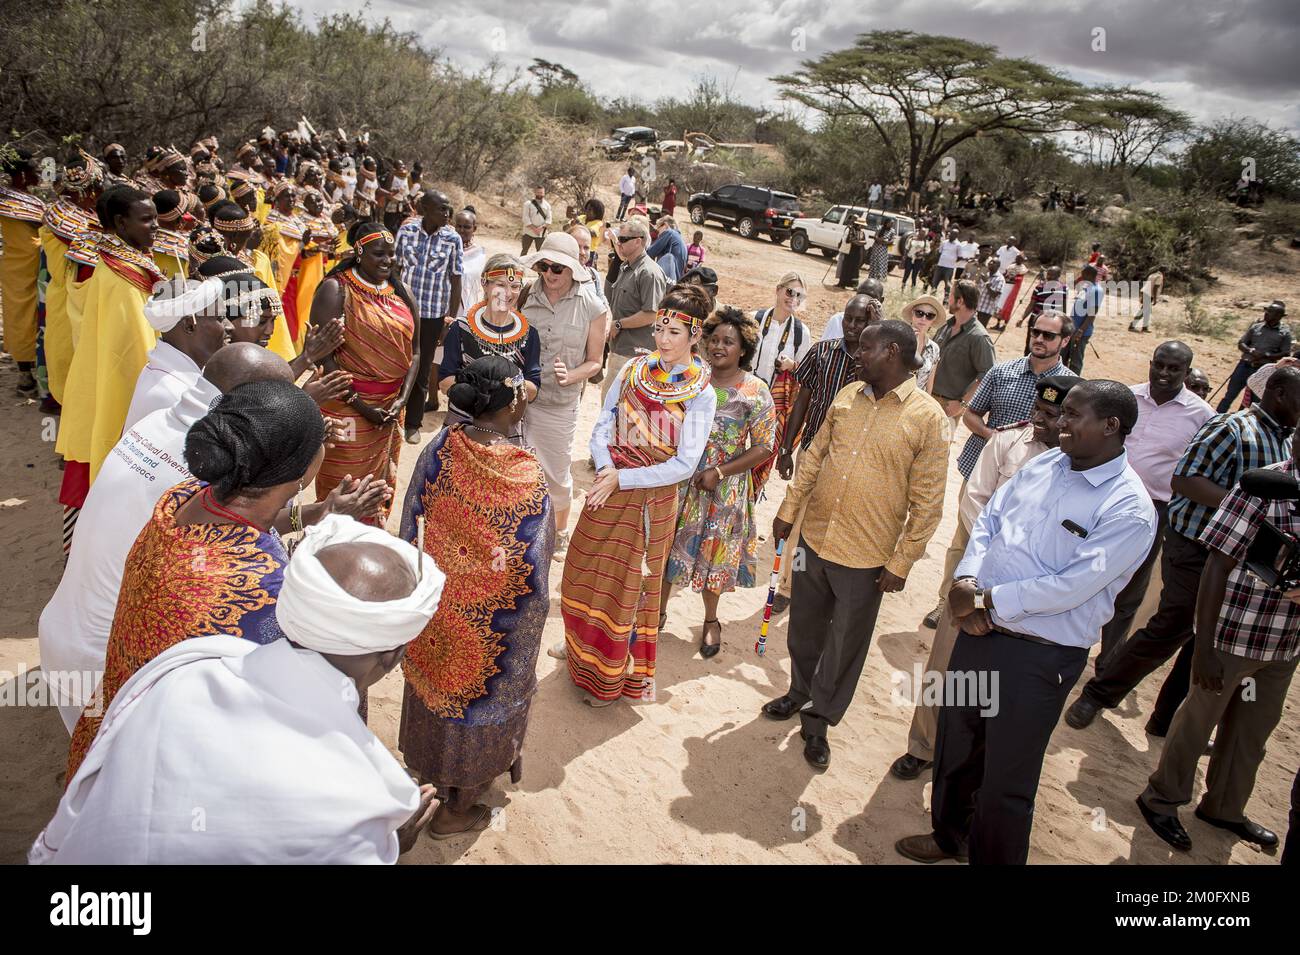 On November 27th and 28th 2018 HRH Crown Princess Mary visited Kalama in Kenya along with the Minister for Development Ulla Tornaess. They arrived at the Kalama Airstrip in Samburu Country on November 27th and were greeted by prominent members of the Kalama societies. Hereafter they visited the Kalama Conservancy where they met with local women who have benefited from Danish support to create small sustainable businesses. The whole visit has as a special focus the promotion of women's rights and economic independence through local projects Stock Photo